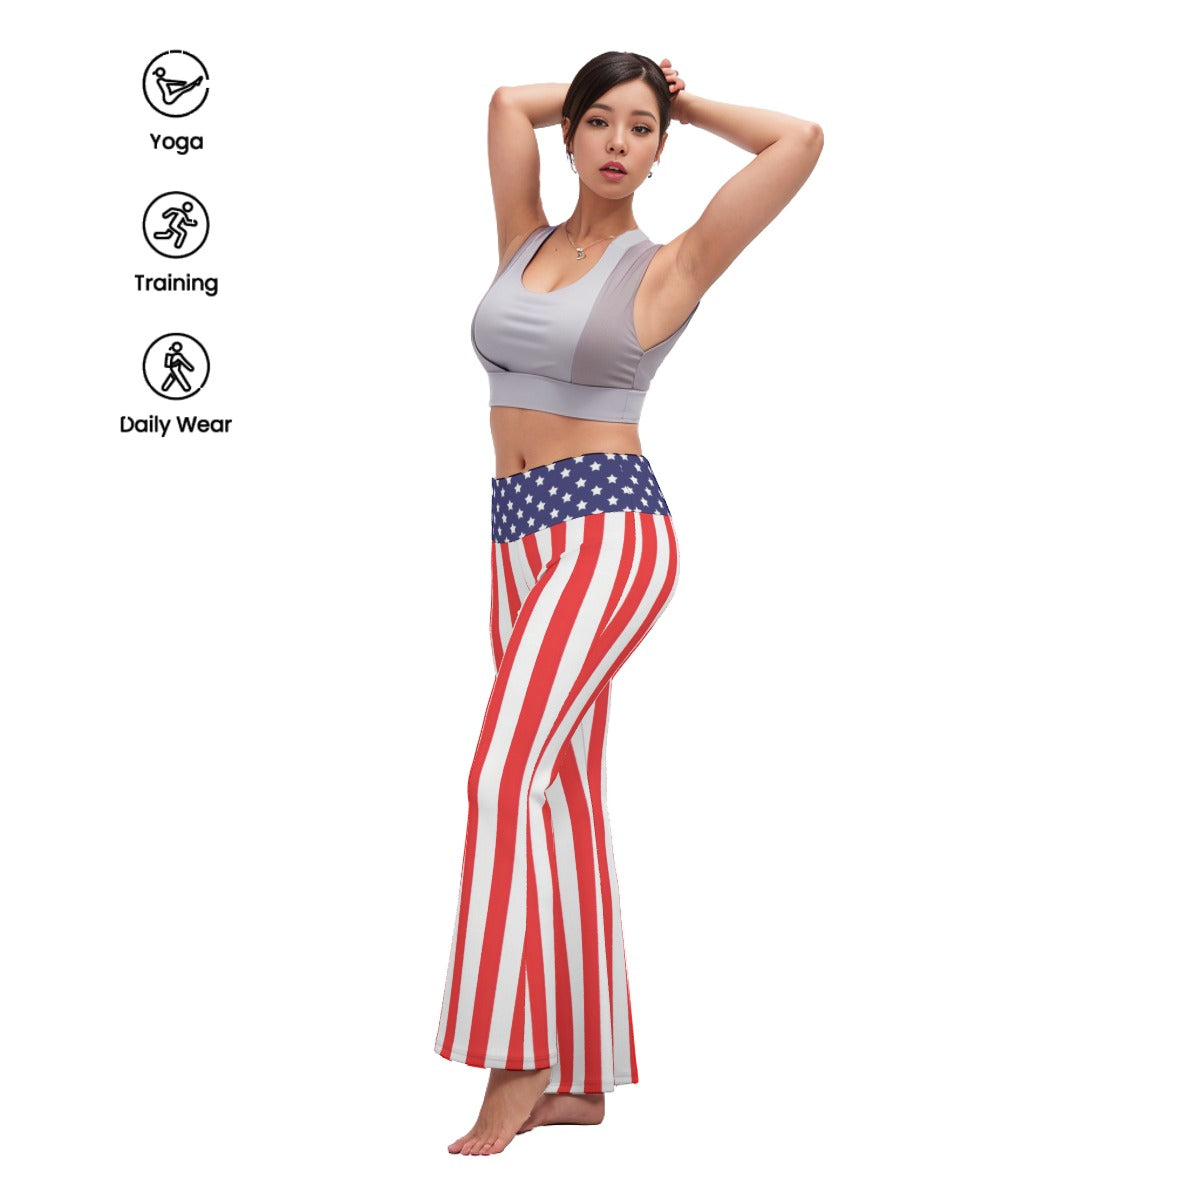 American Flag Inspired Women's Flared Yoga Pants - Fashion Meets Patriotism (Style-1)